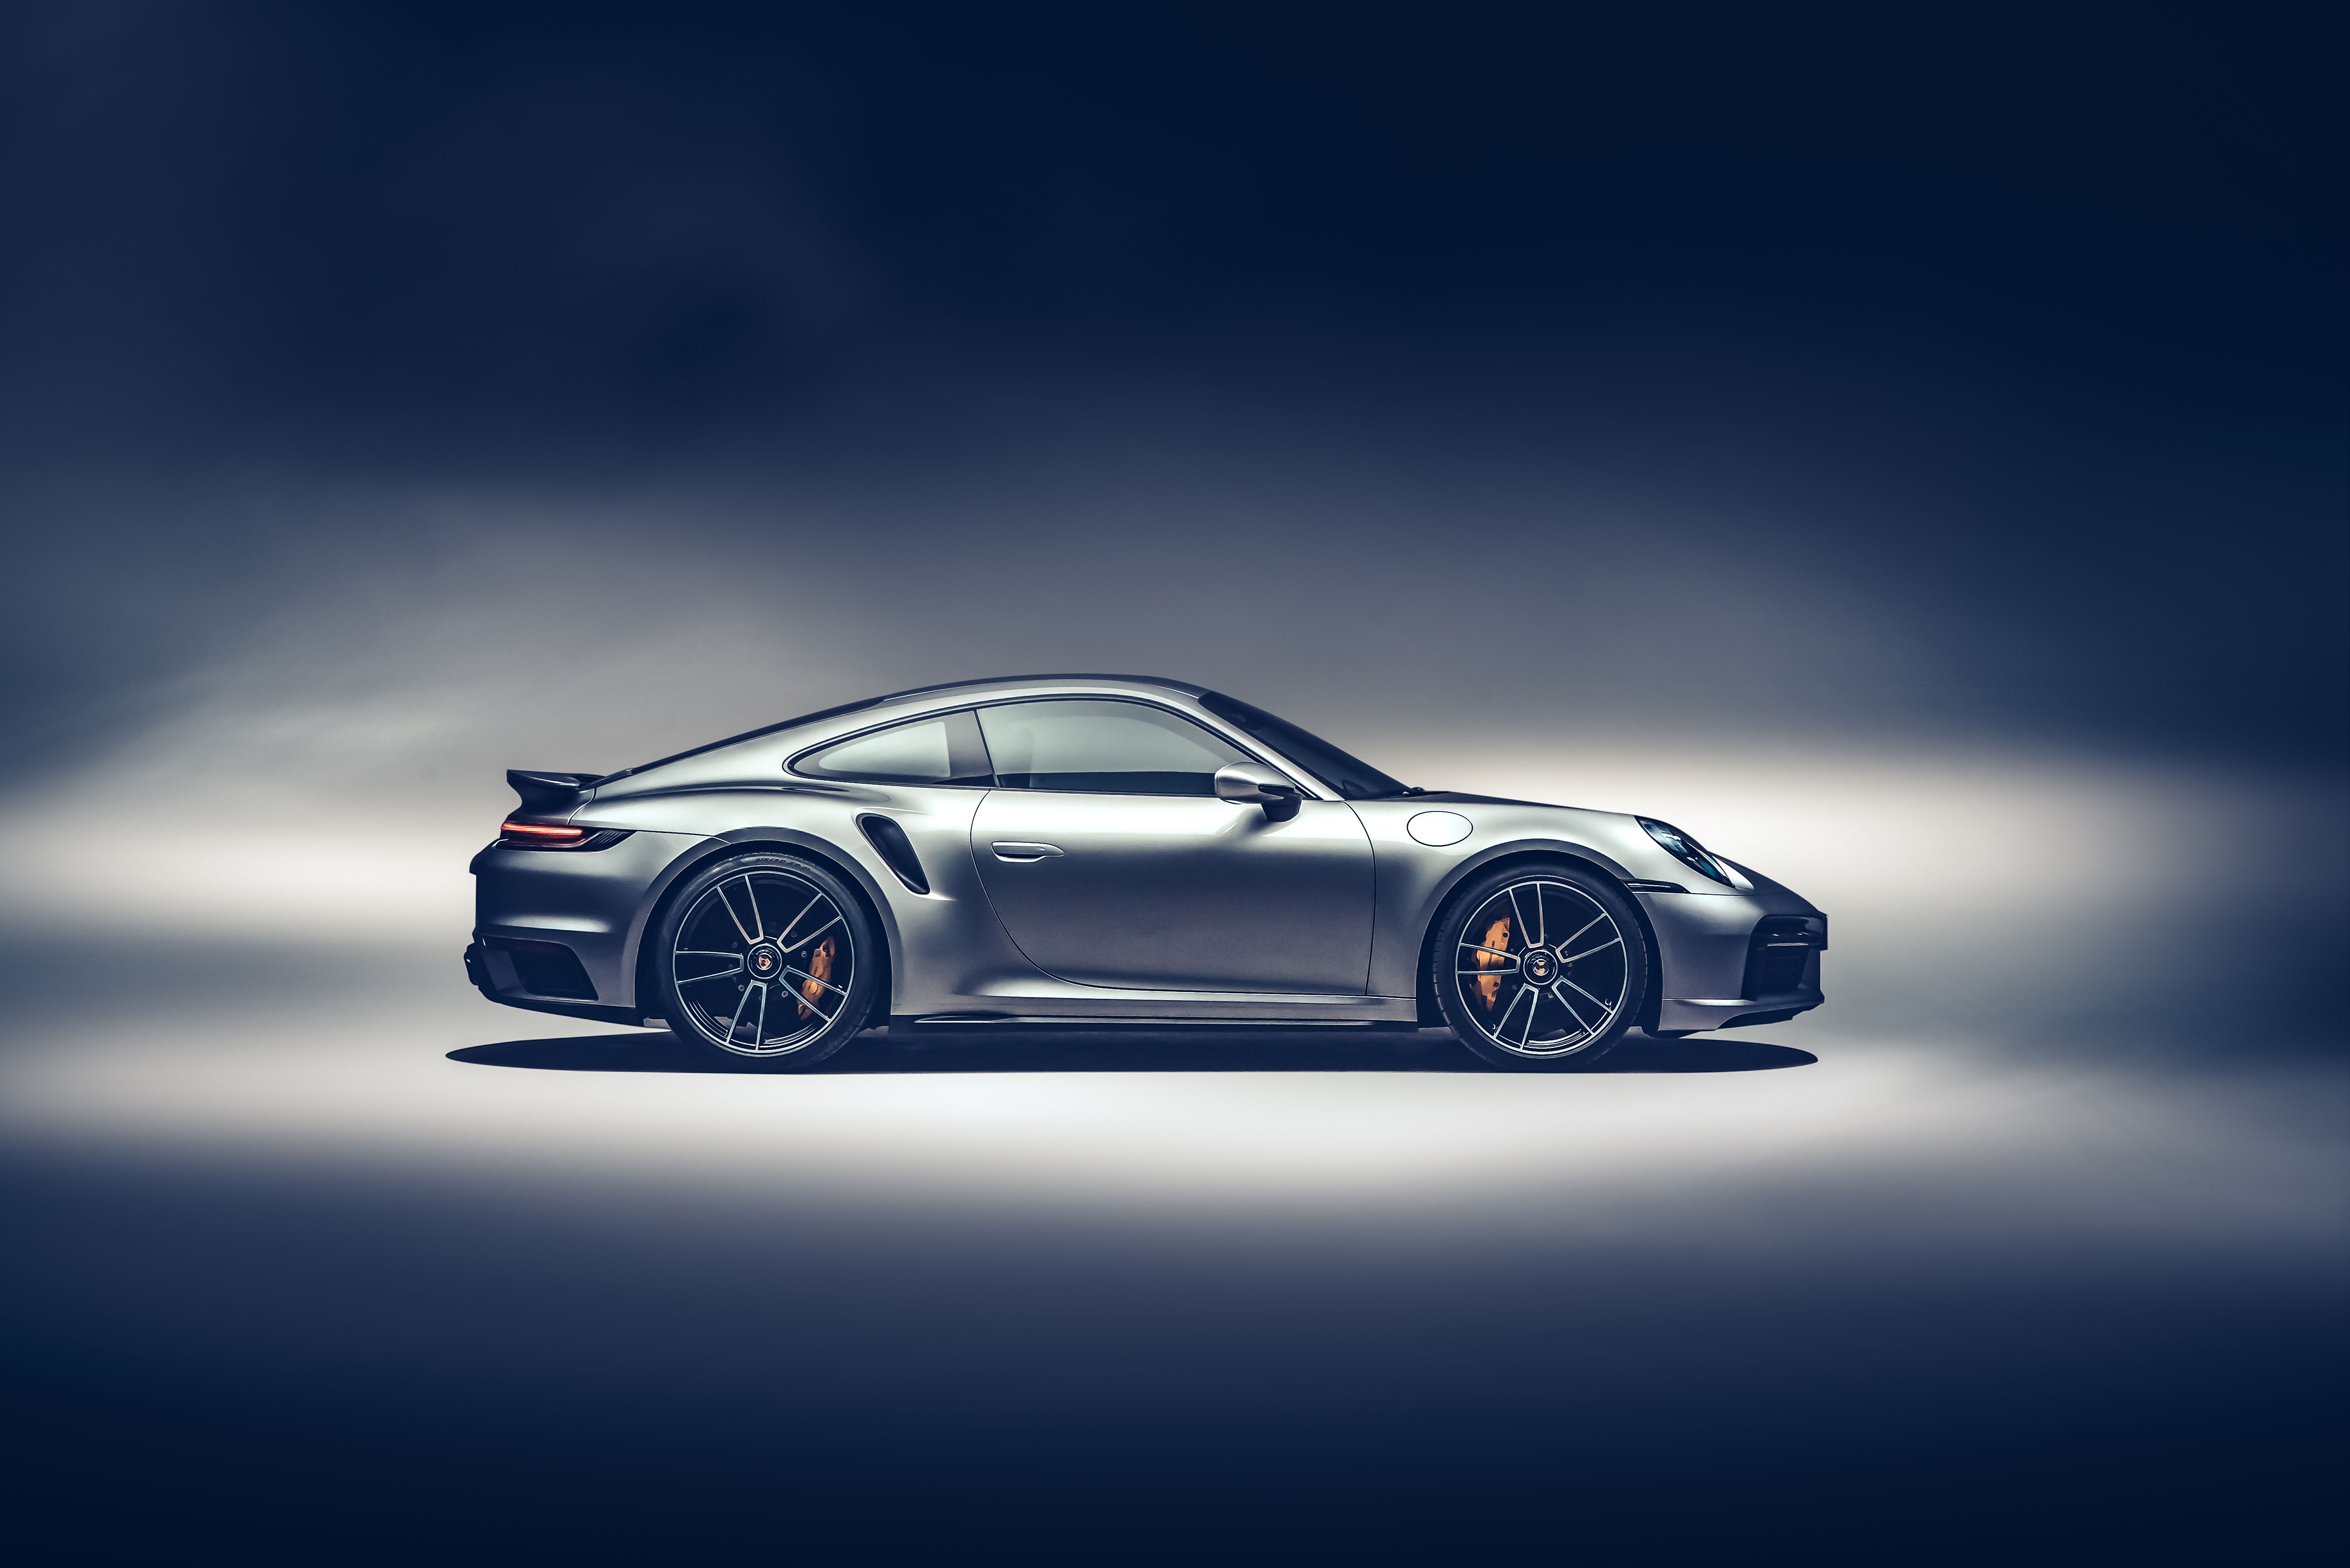 Porsche 911 Turbo S, HD Cars, 4k Wallpaper, Image, Background, Photo and Picture